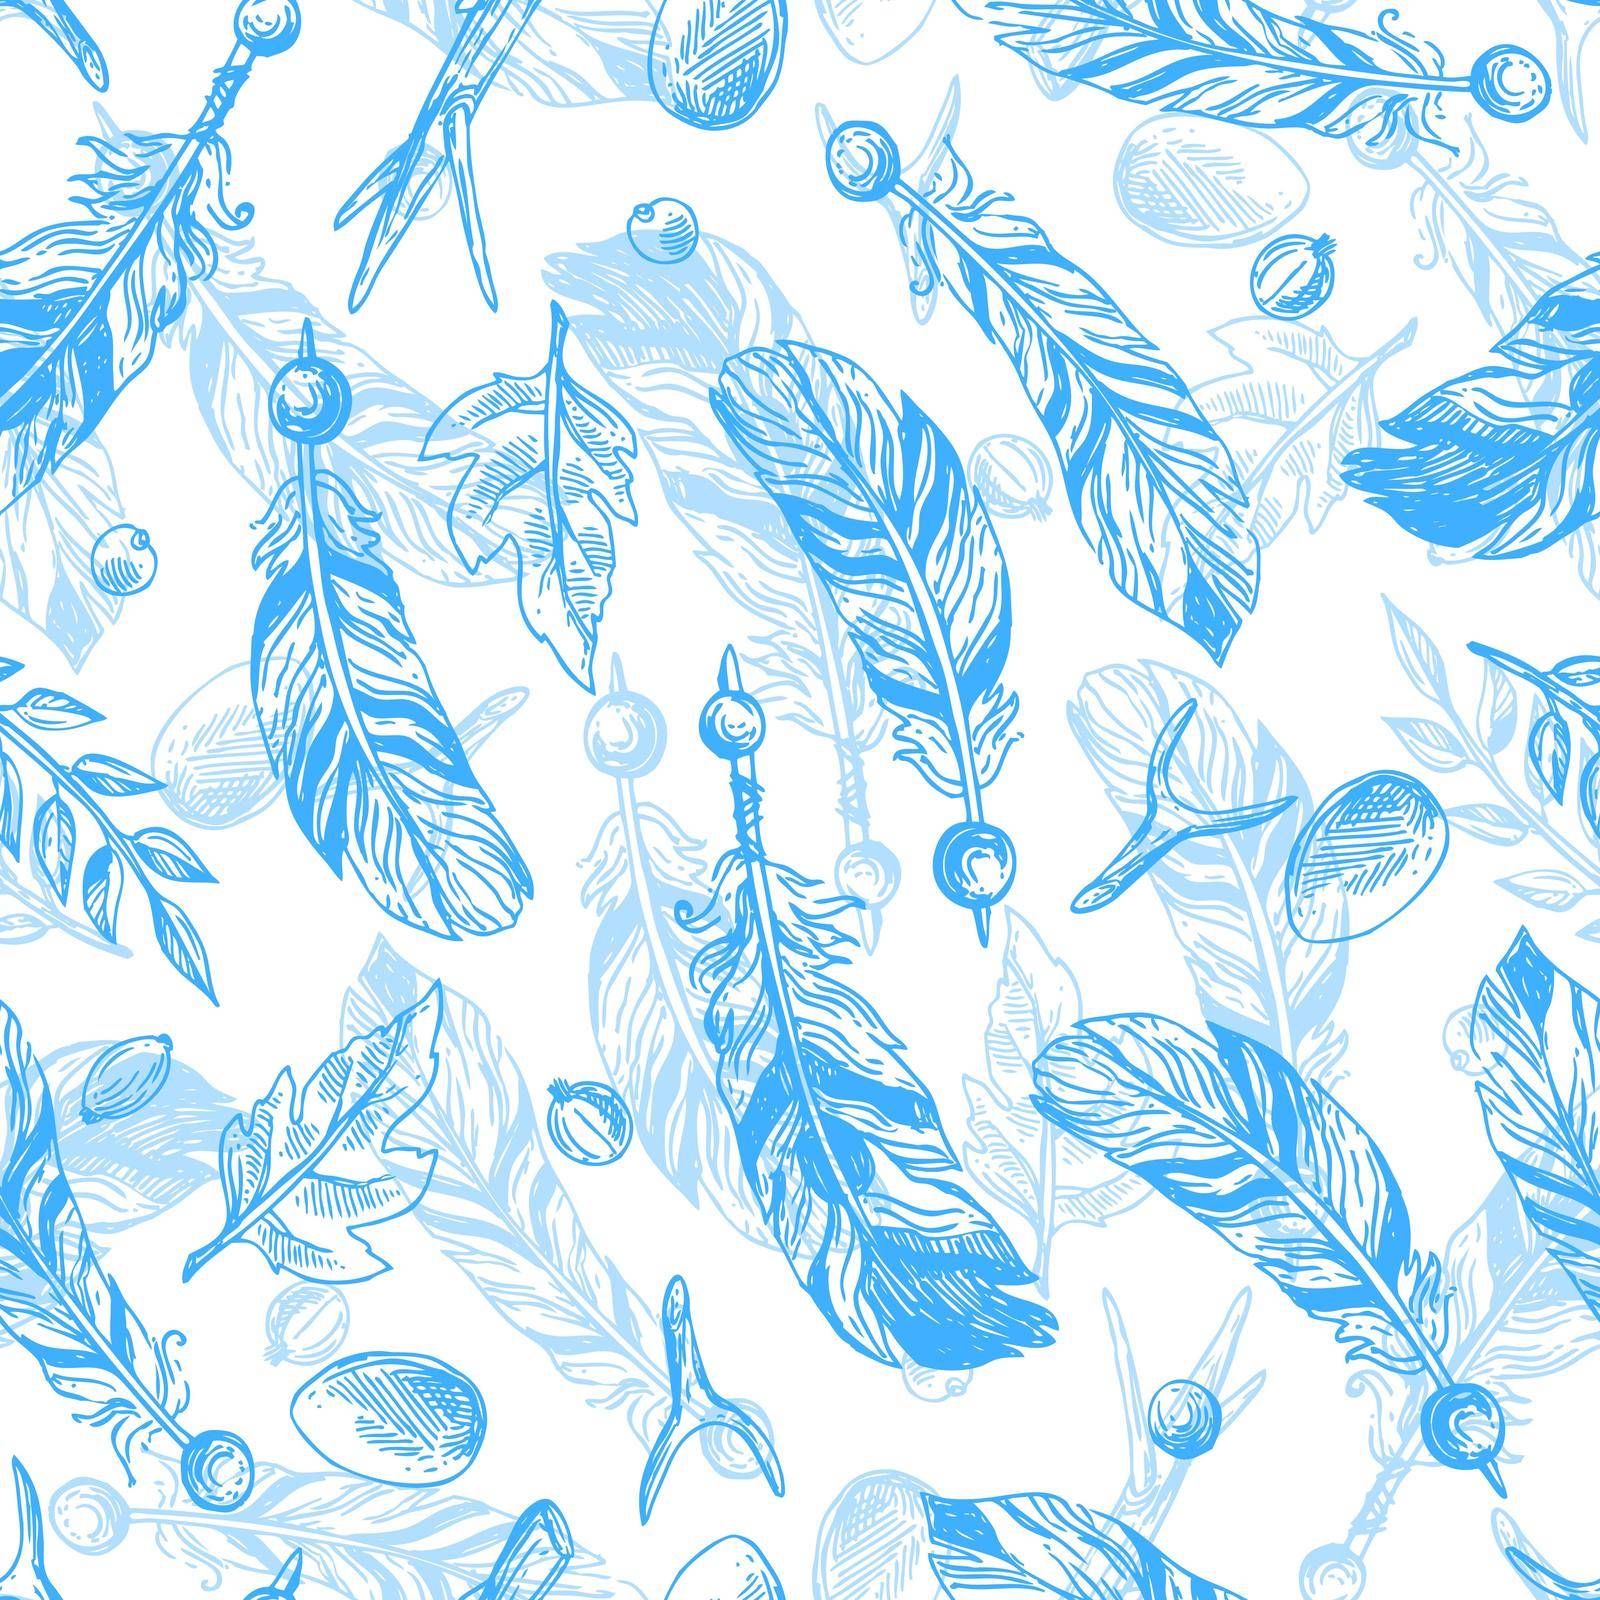 Hand drawn vector seamless pattern with feathers. Boho style drawing.